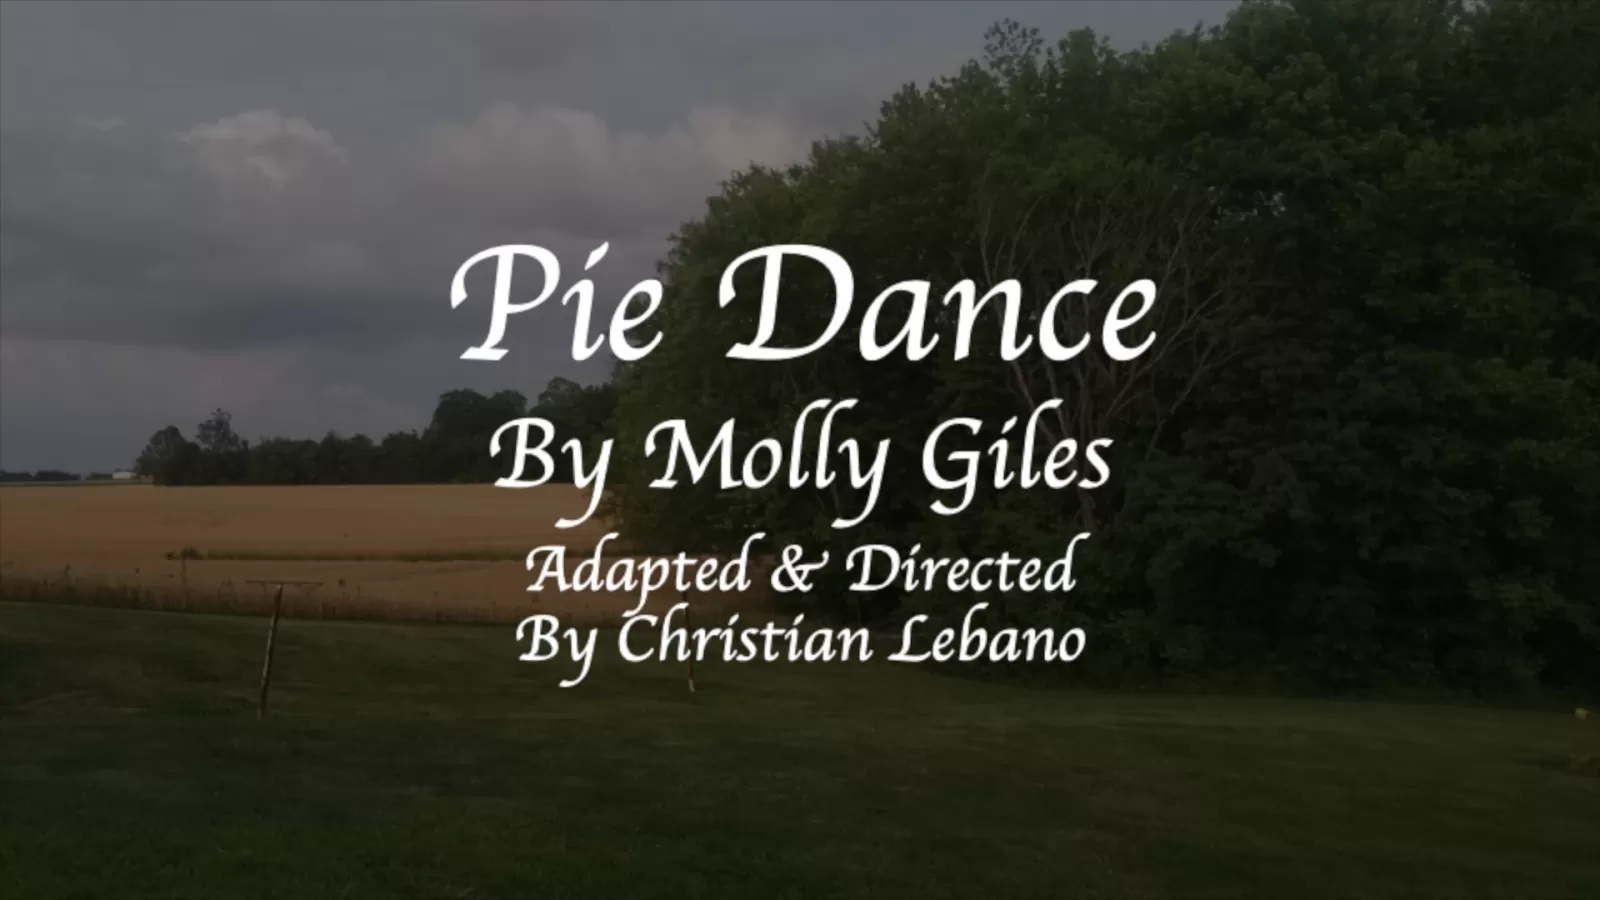 "Pie Dance" by Molly Giles